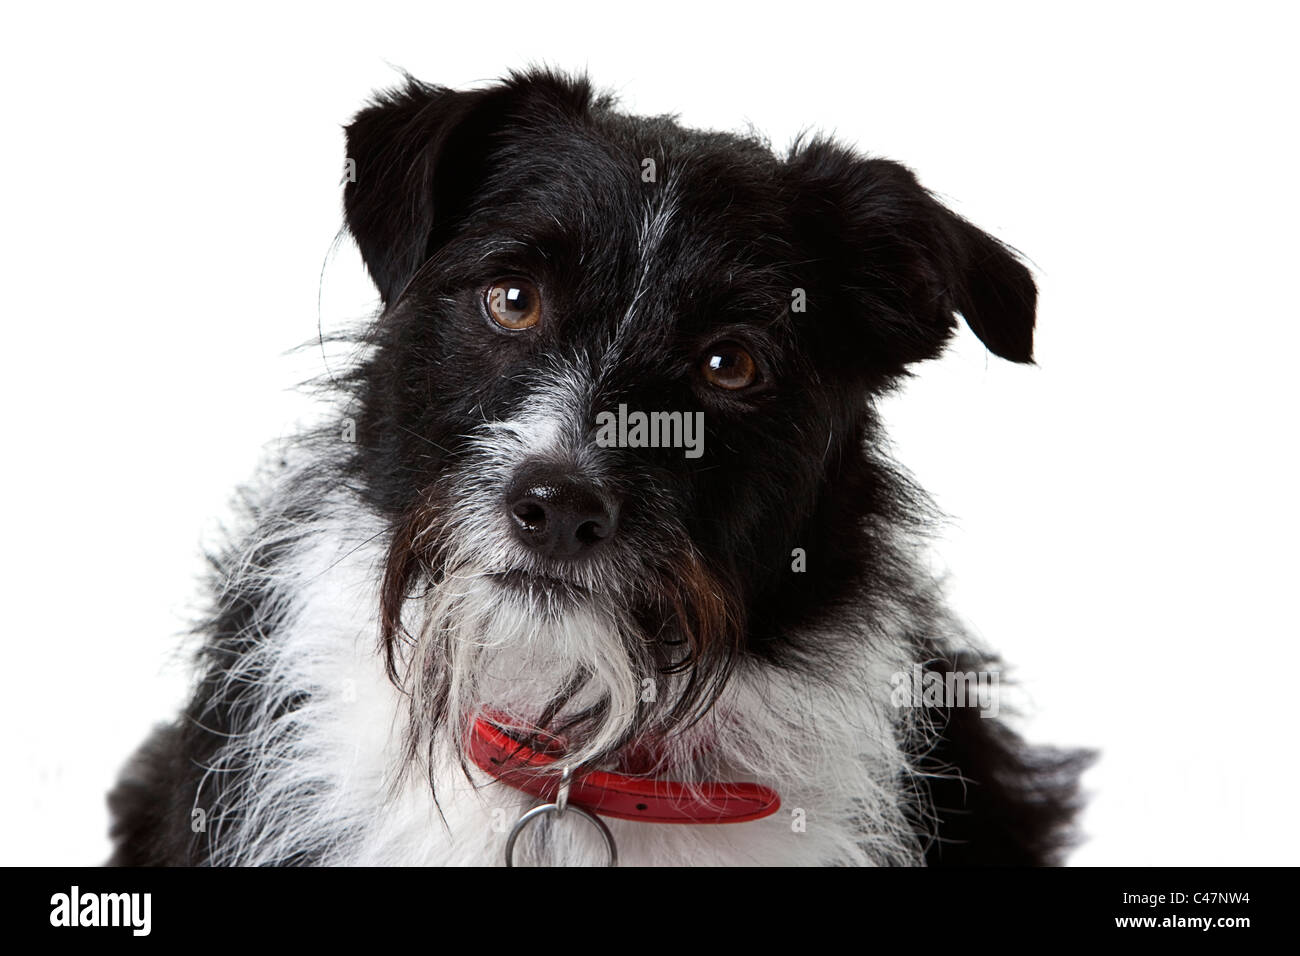 Portrait of a black and white terrier wearing a red collar against a pure white background. Stock Photo